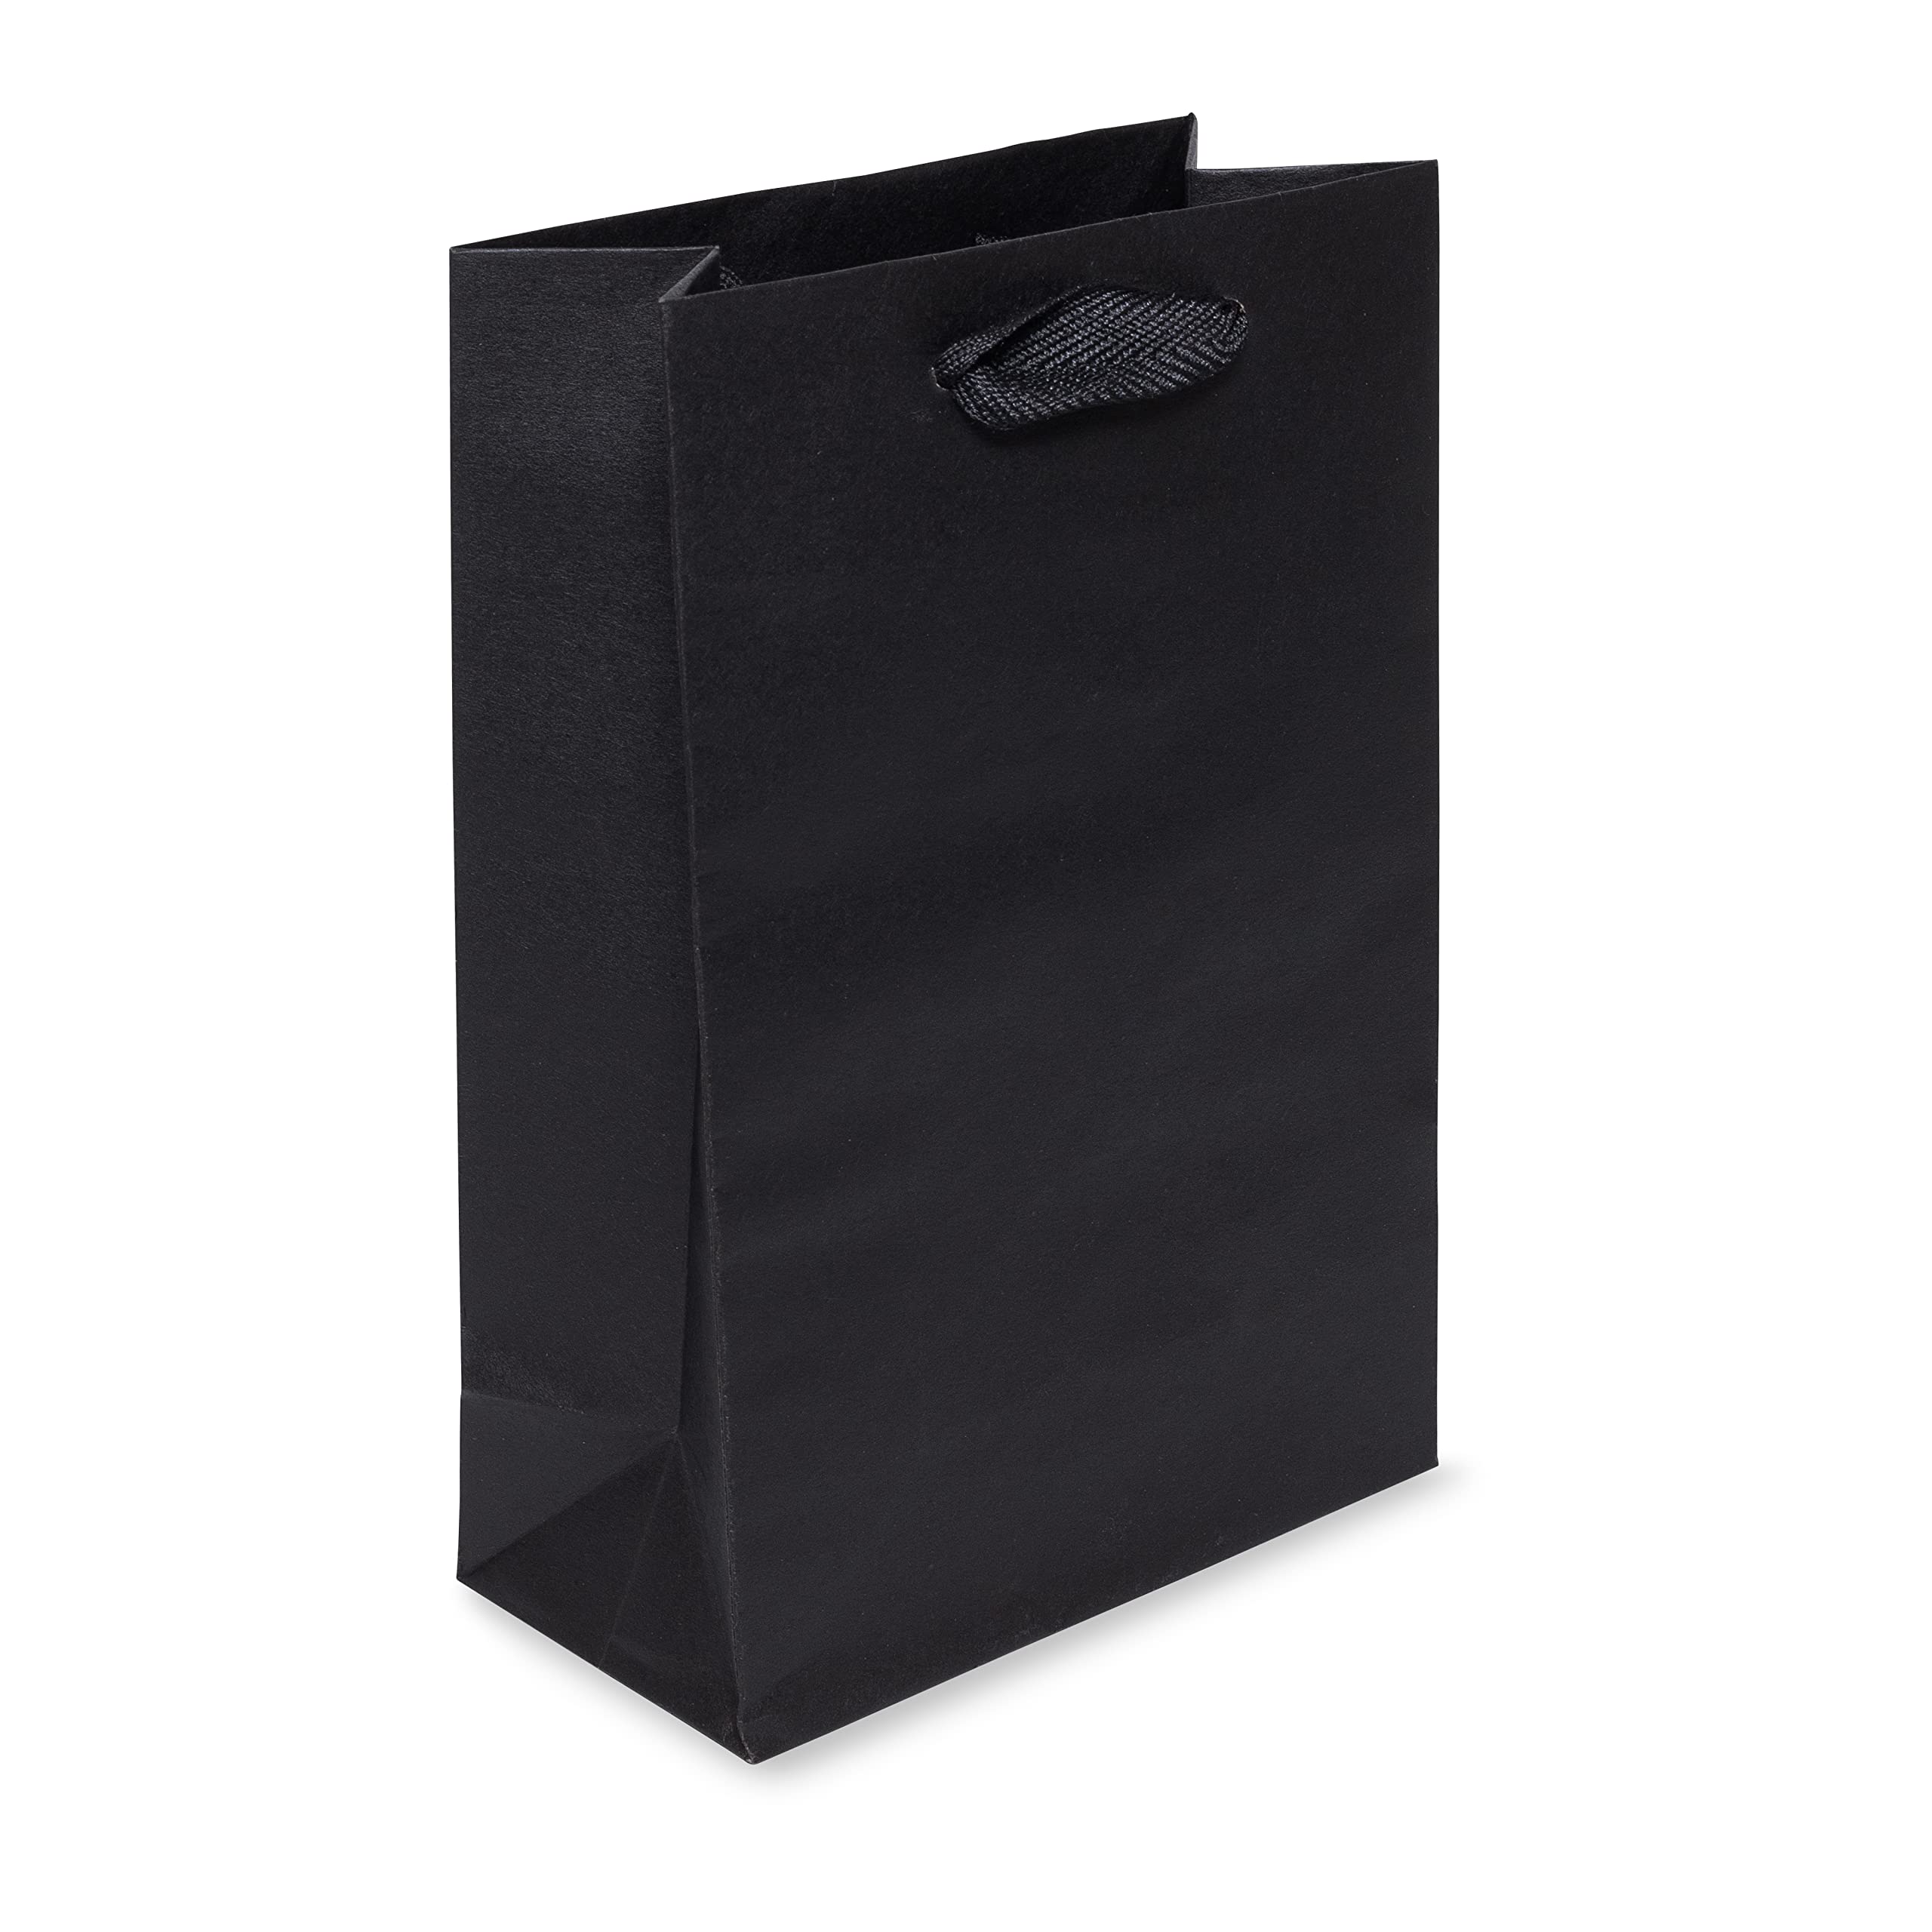 Black Gift Bags with Handles - 6x3x9 50 Pack Mini Gift Bags with Handles, Boutique Bags, Kraft Paper Totes for Wedding, Party Favors, Goodie Bags, Gift Wrap, Small Business & Retail Shopping, Bulk